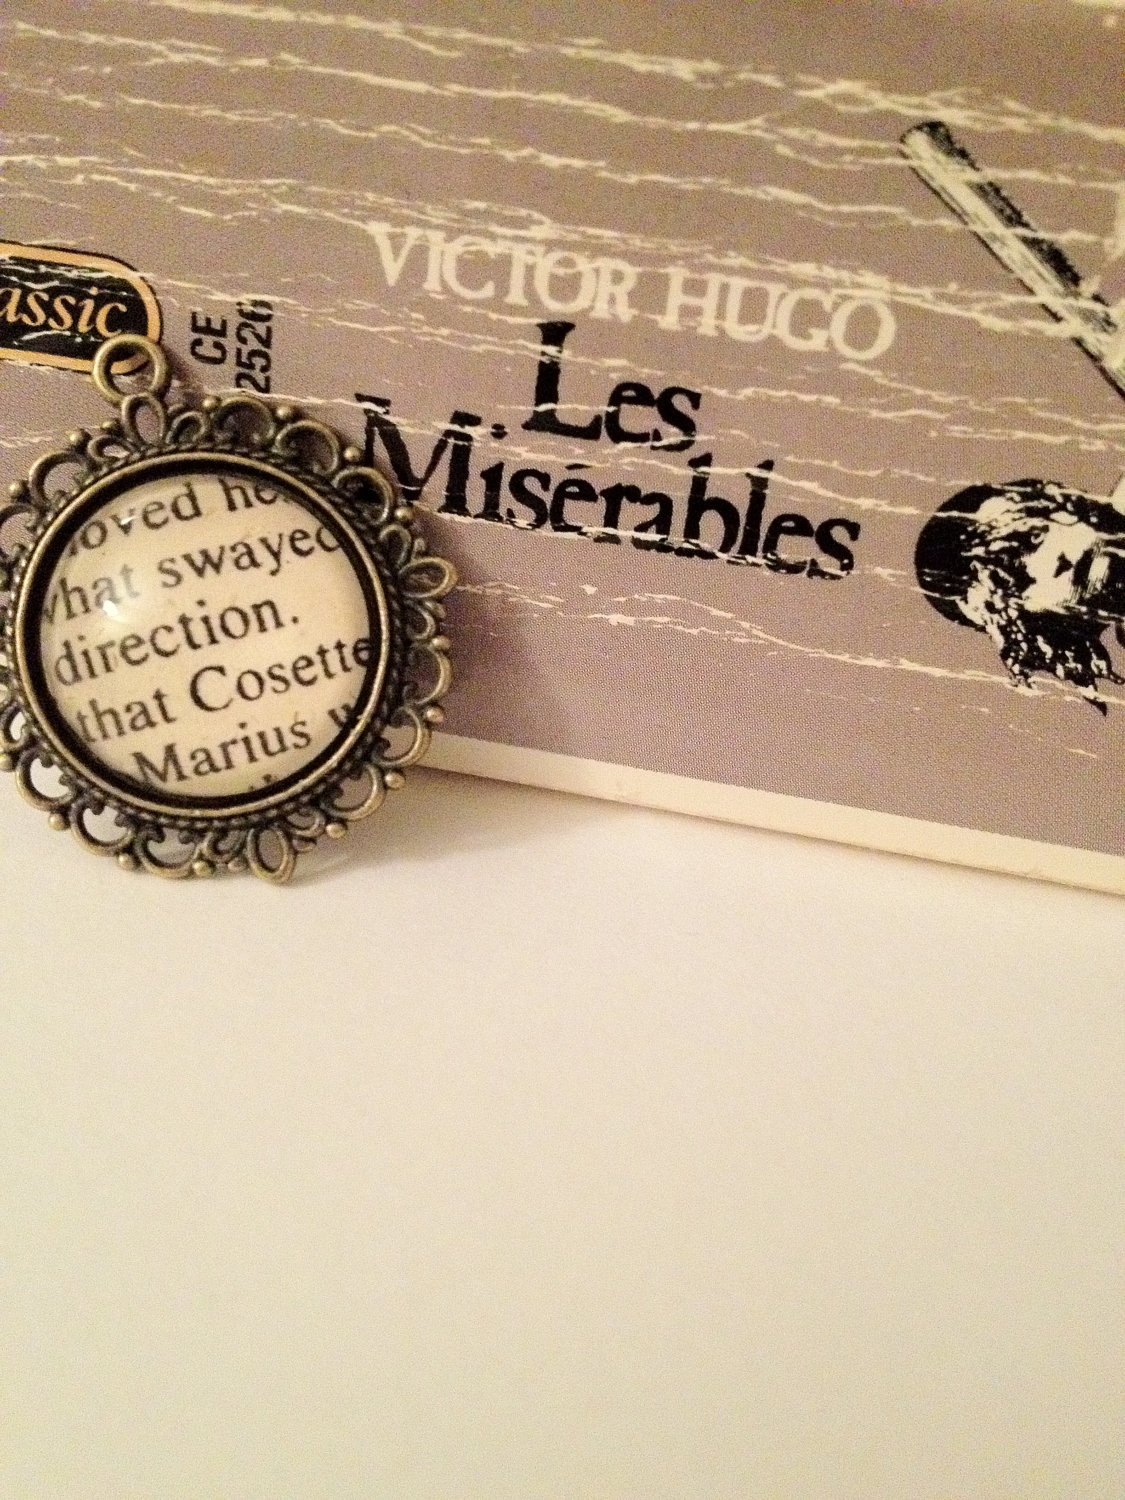 Marius And Cosette From Les Miserables By Victor Hugo Antiqued Bronze Book Page Necklace